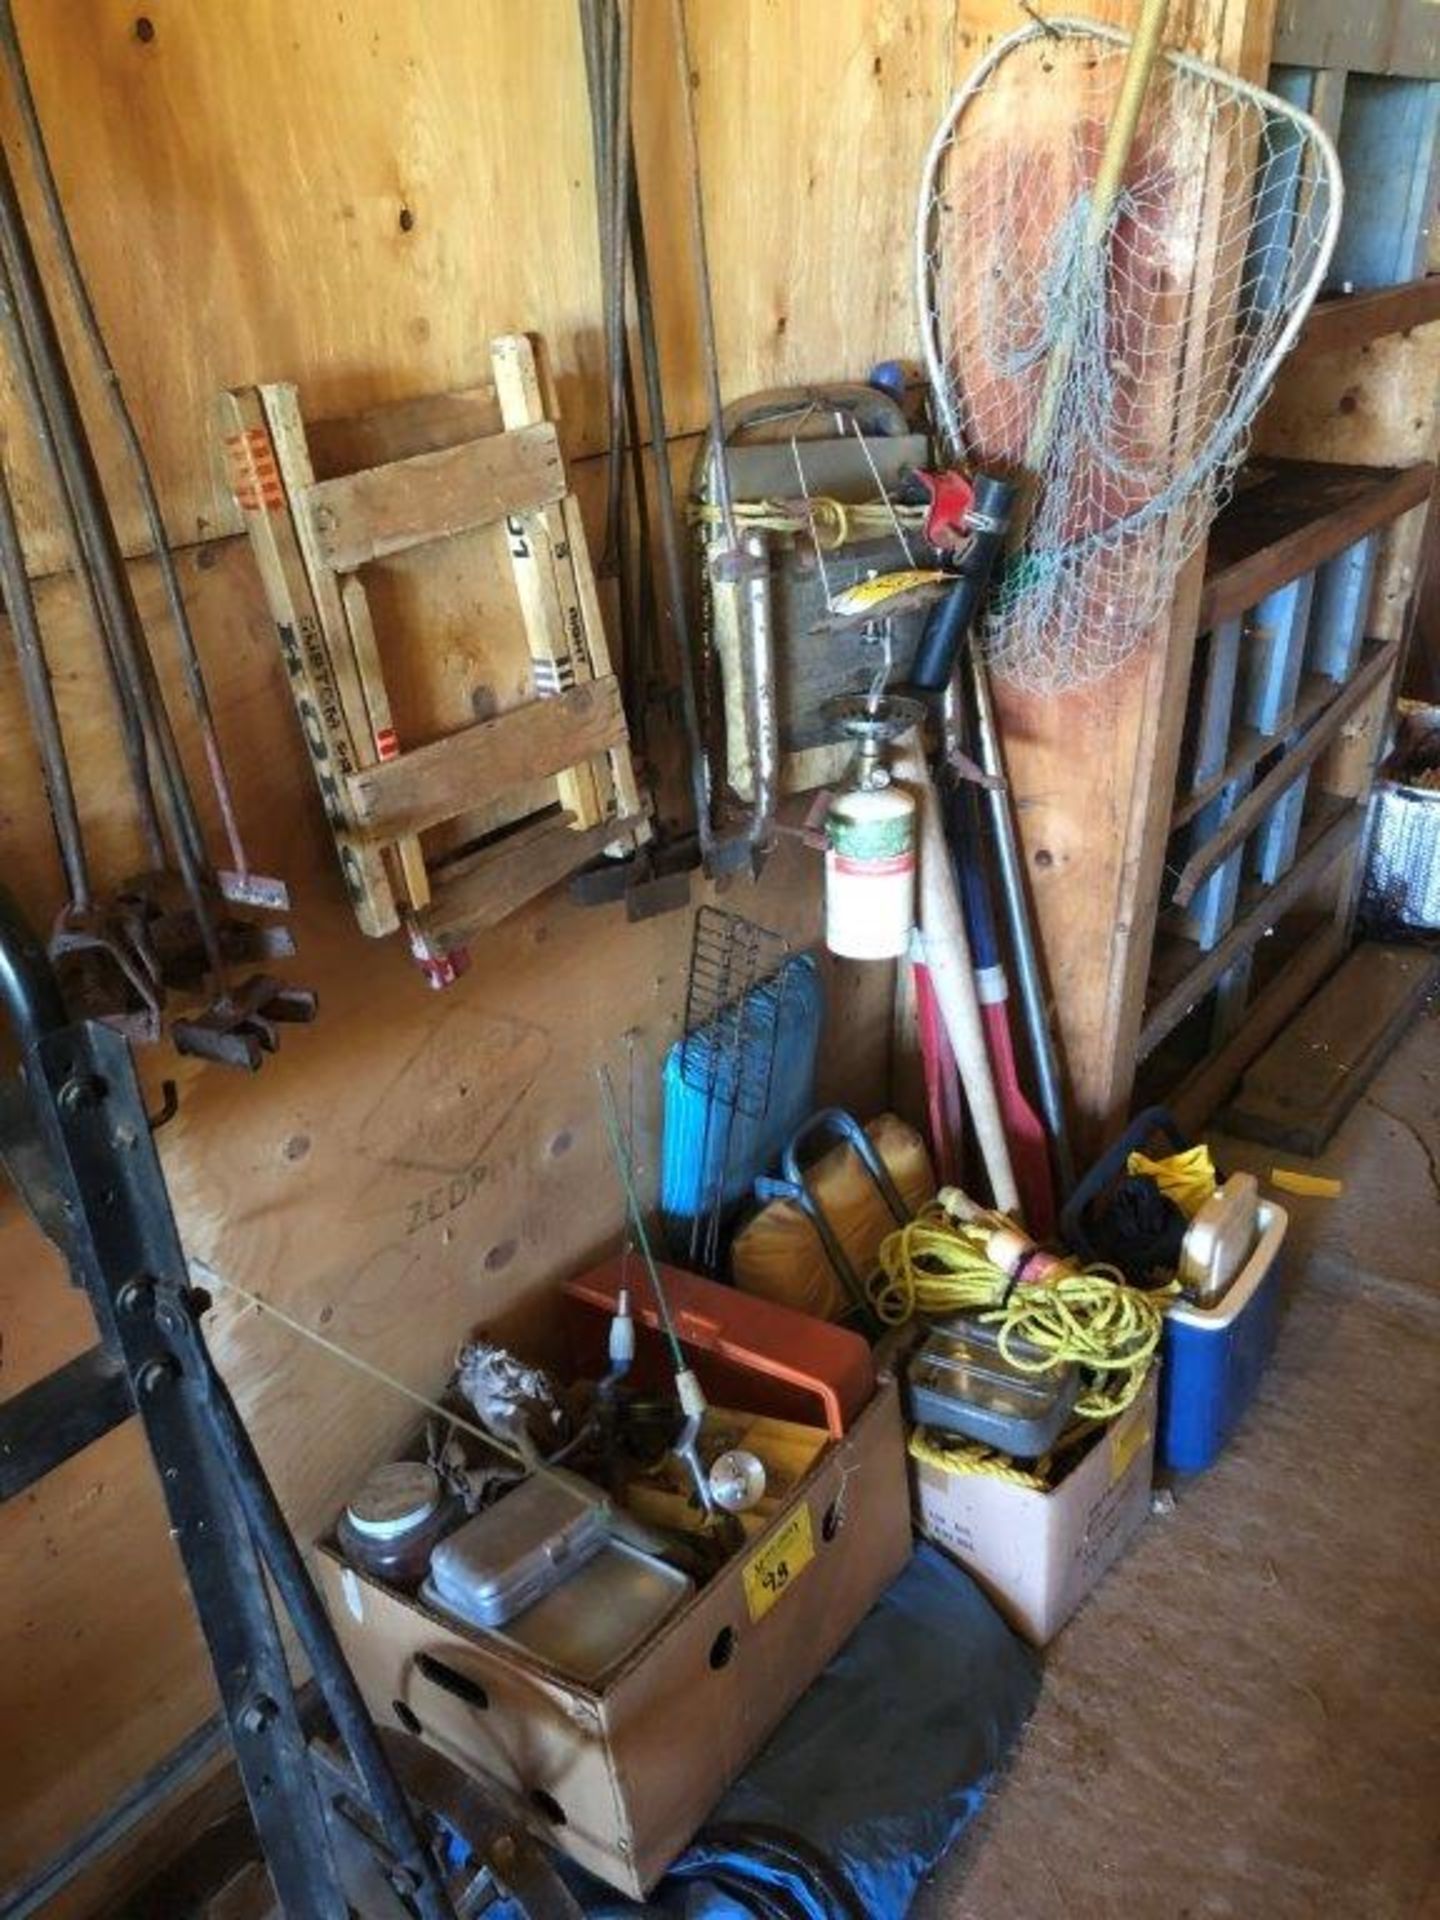 L/O ASSORTED CAMPING AND FISHING GEAR, NETS, CHAIRS, HEATER, ETC.